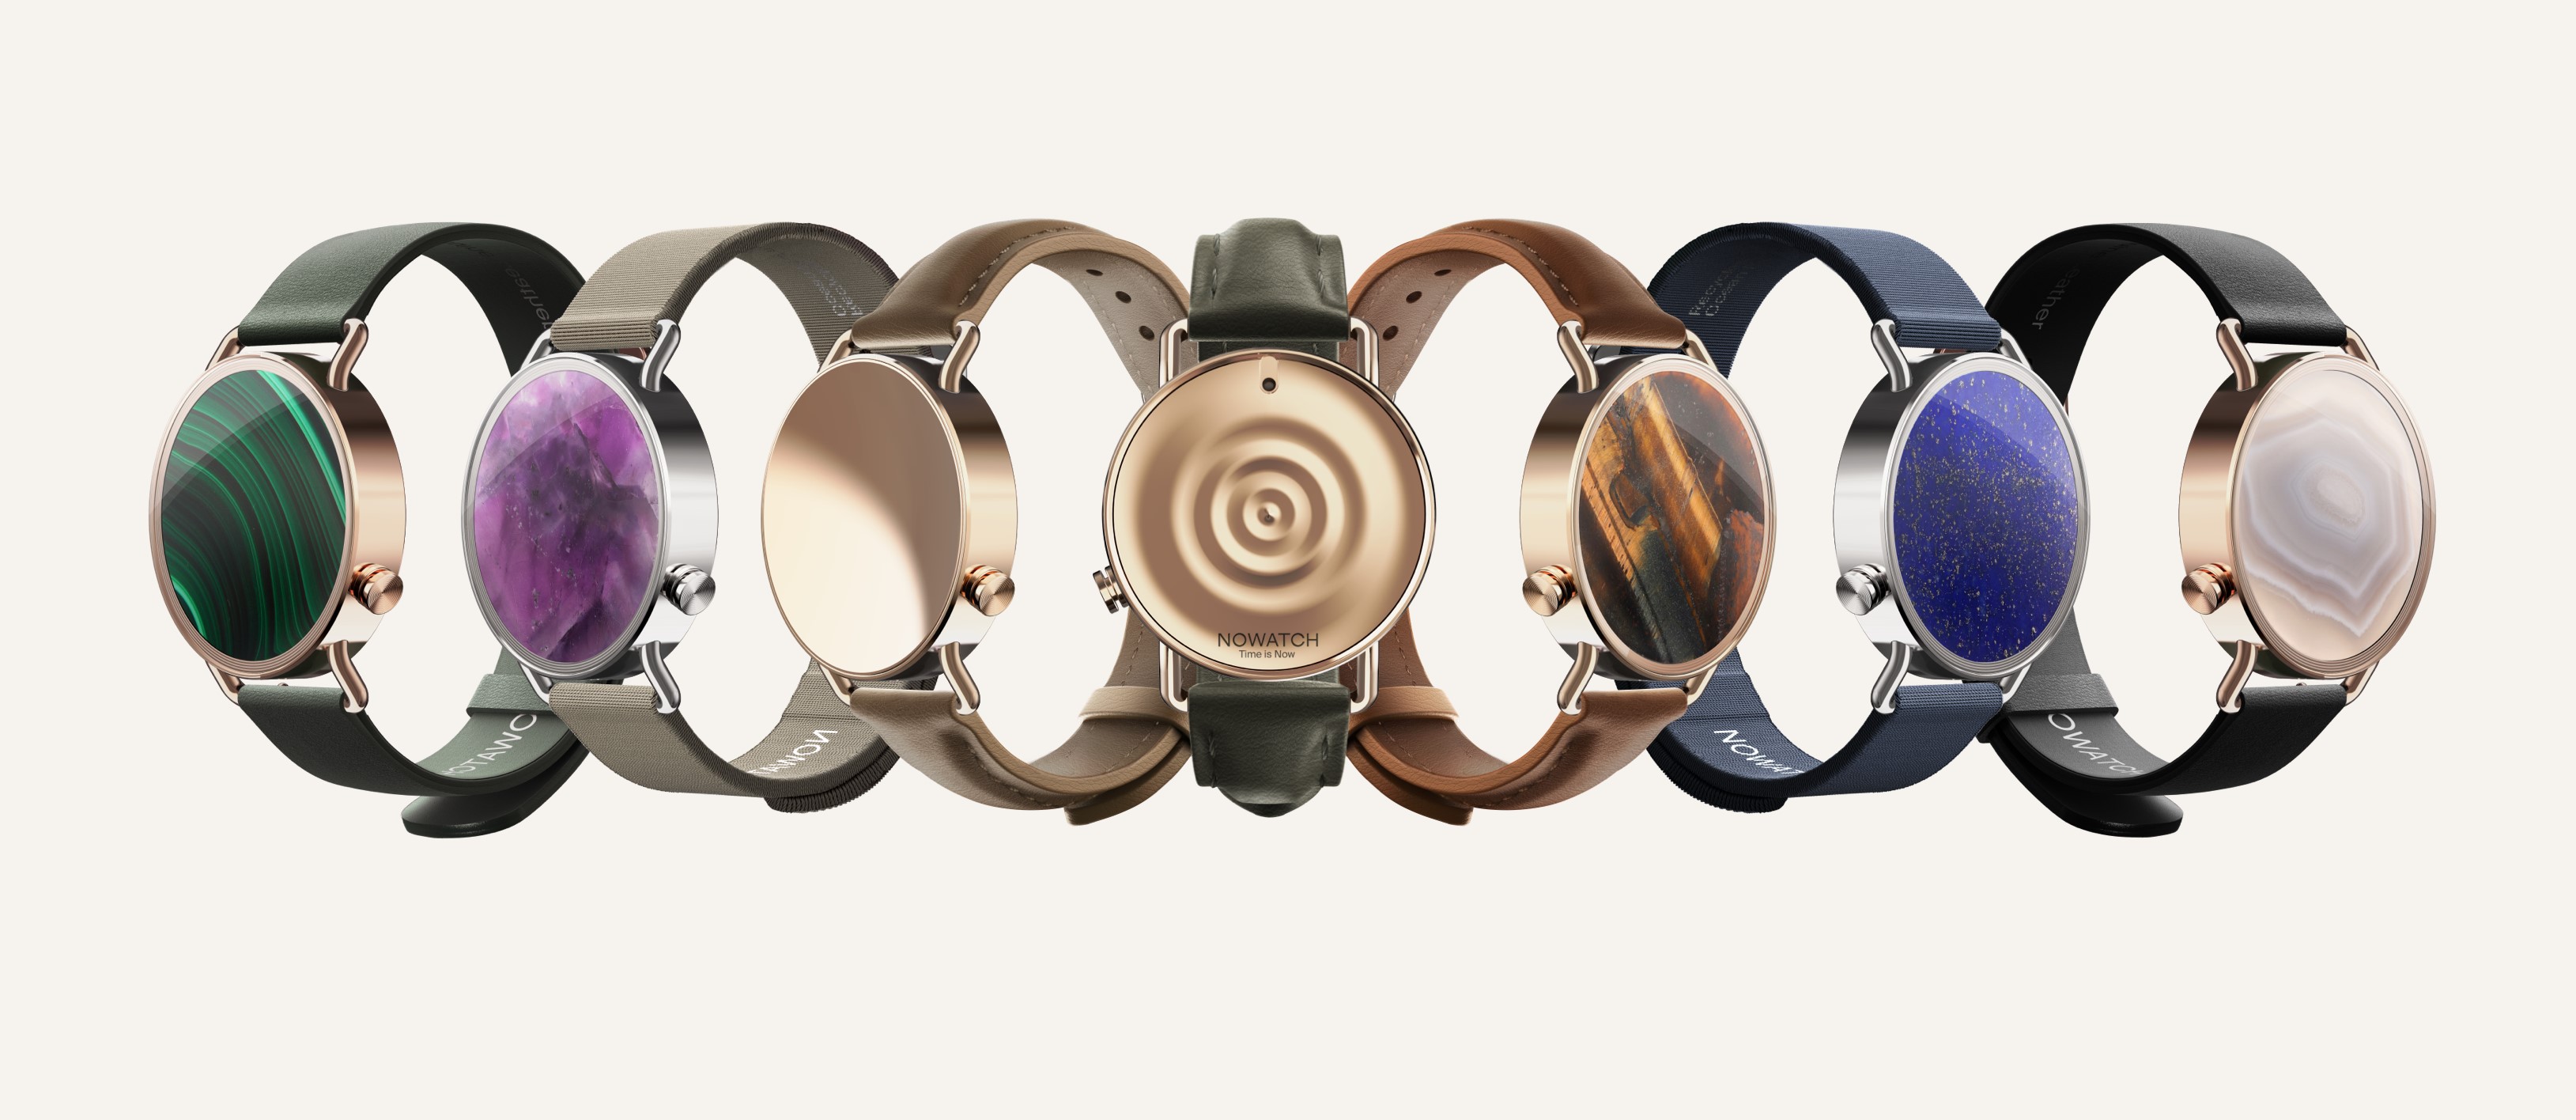 NOWATCH launches signature smartwatch with swappable display-less faces to remove digital and time distractions